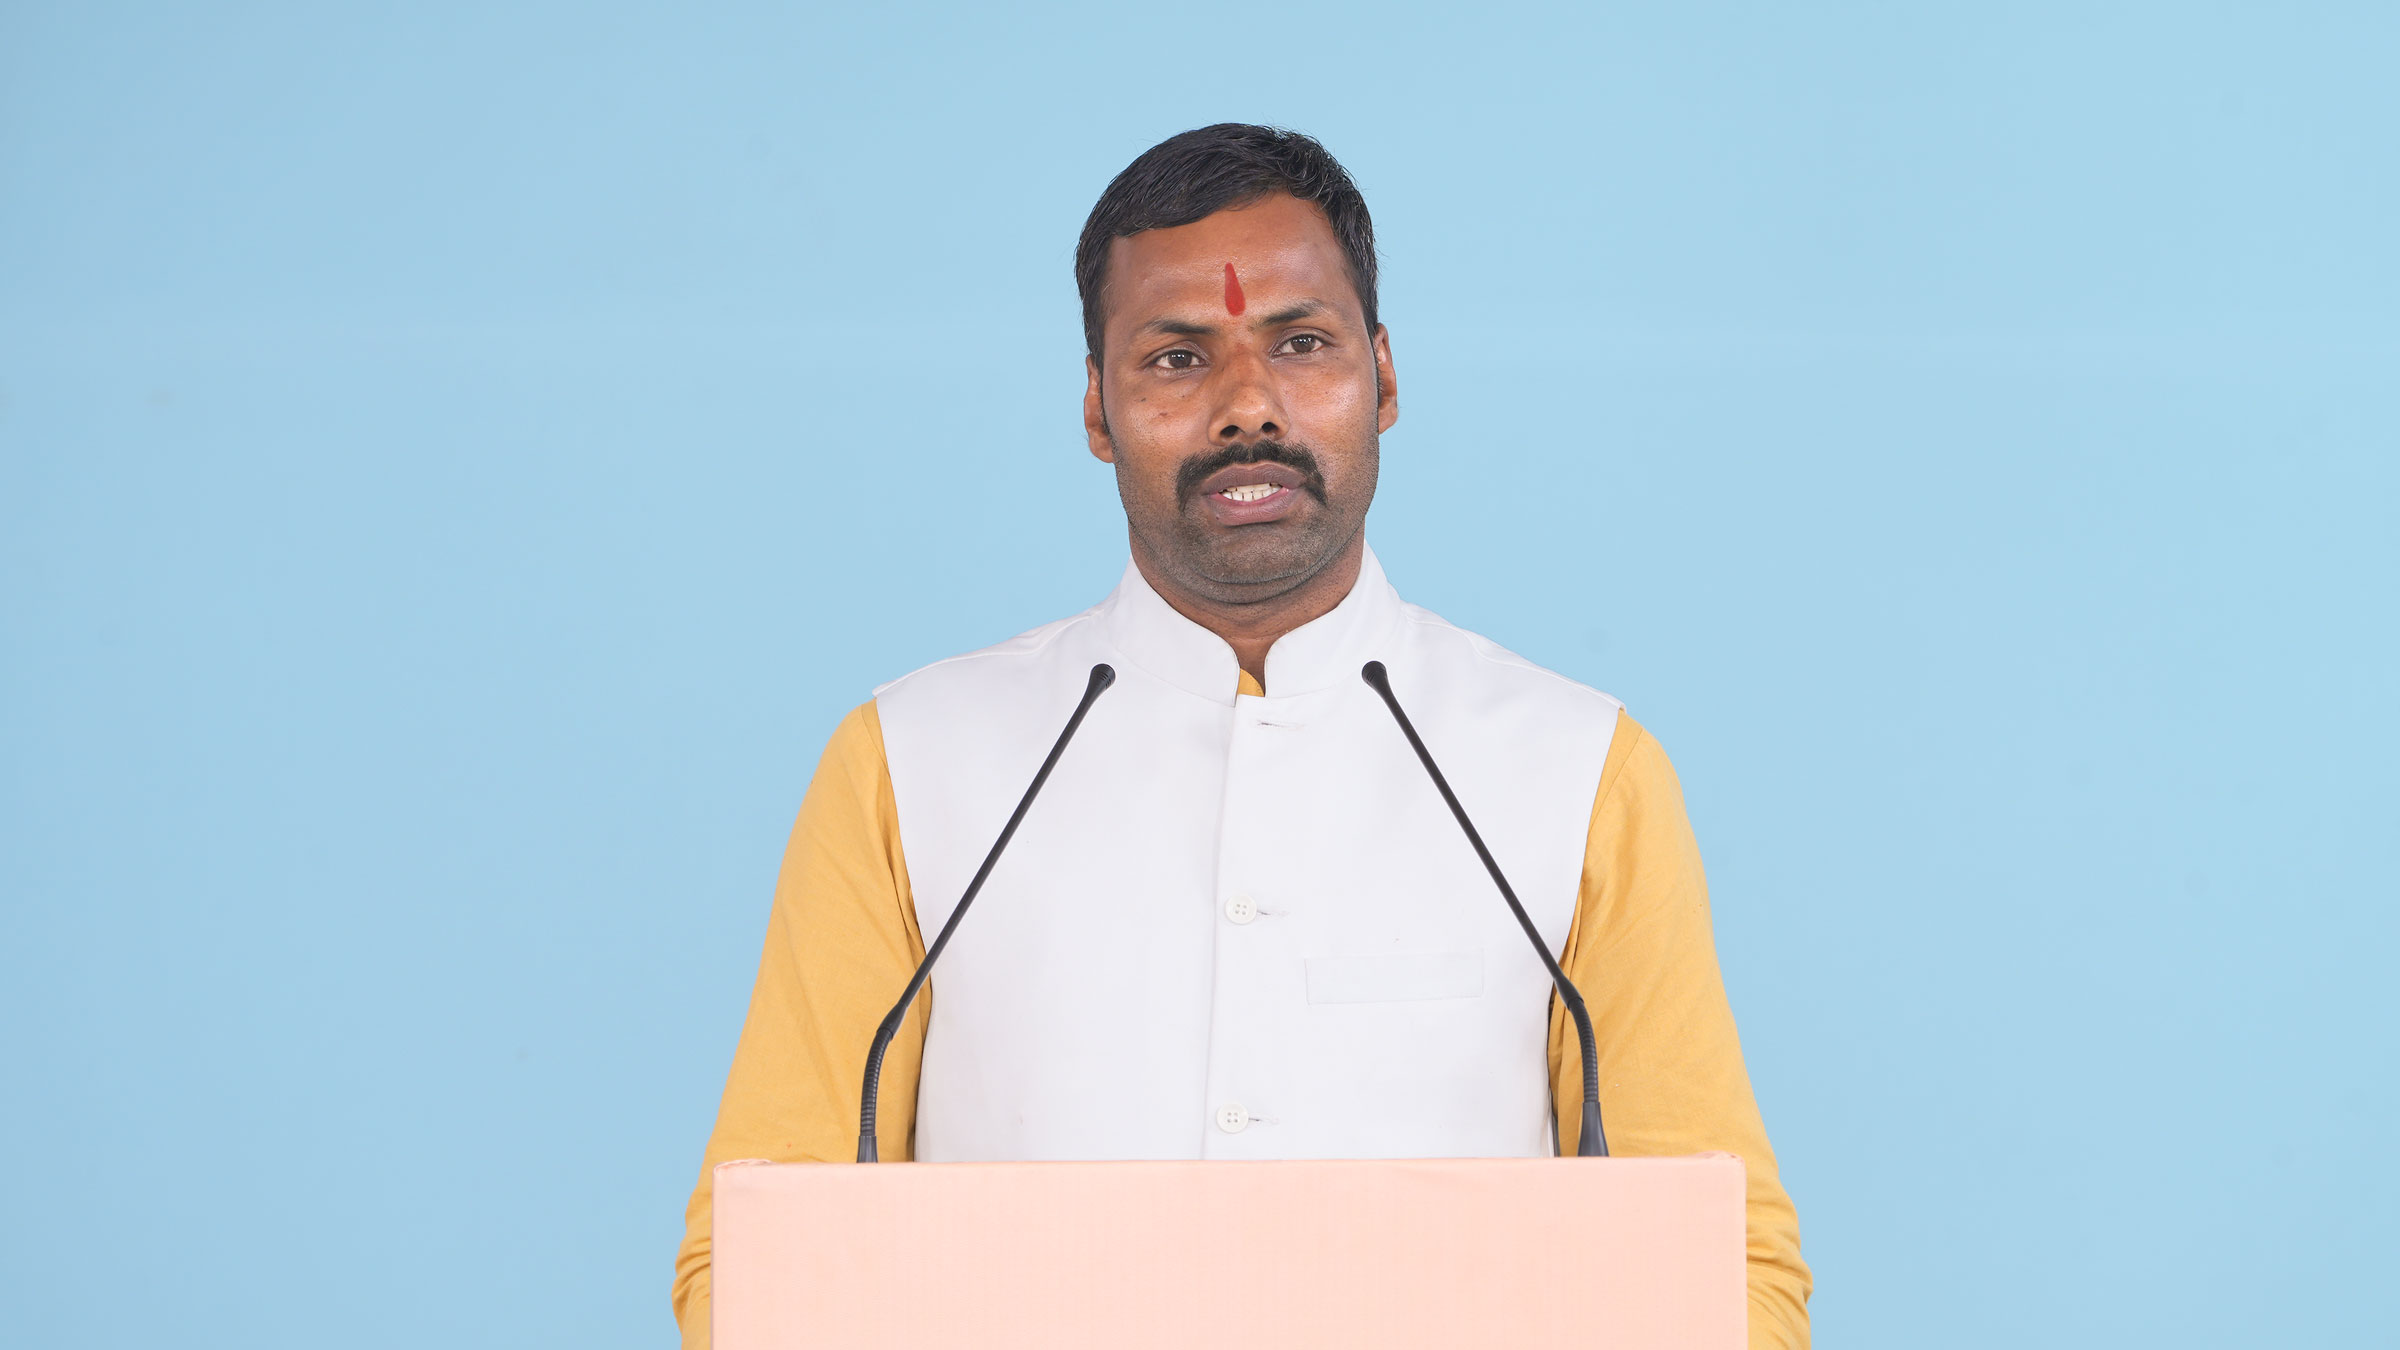 Mr Krishna Gurjar (State Security Chief, Bajrang Dal, Haryana) explaining the special efforts made by the Bajrang Dal to protect Hindus in Haryana